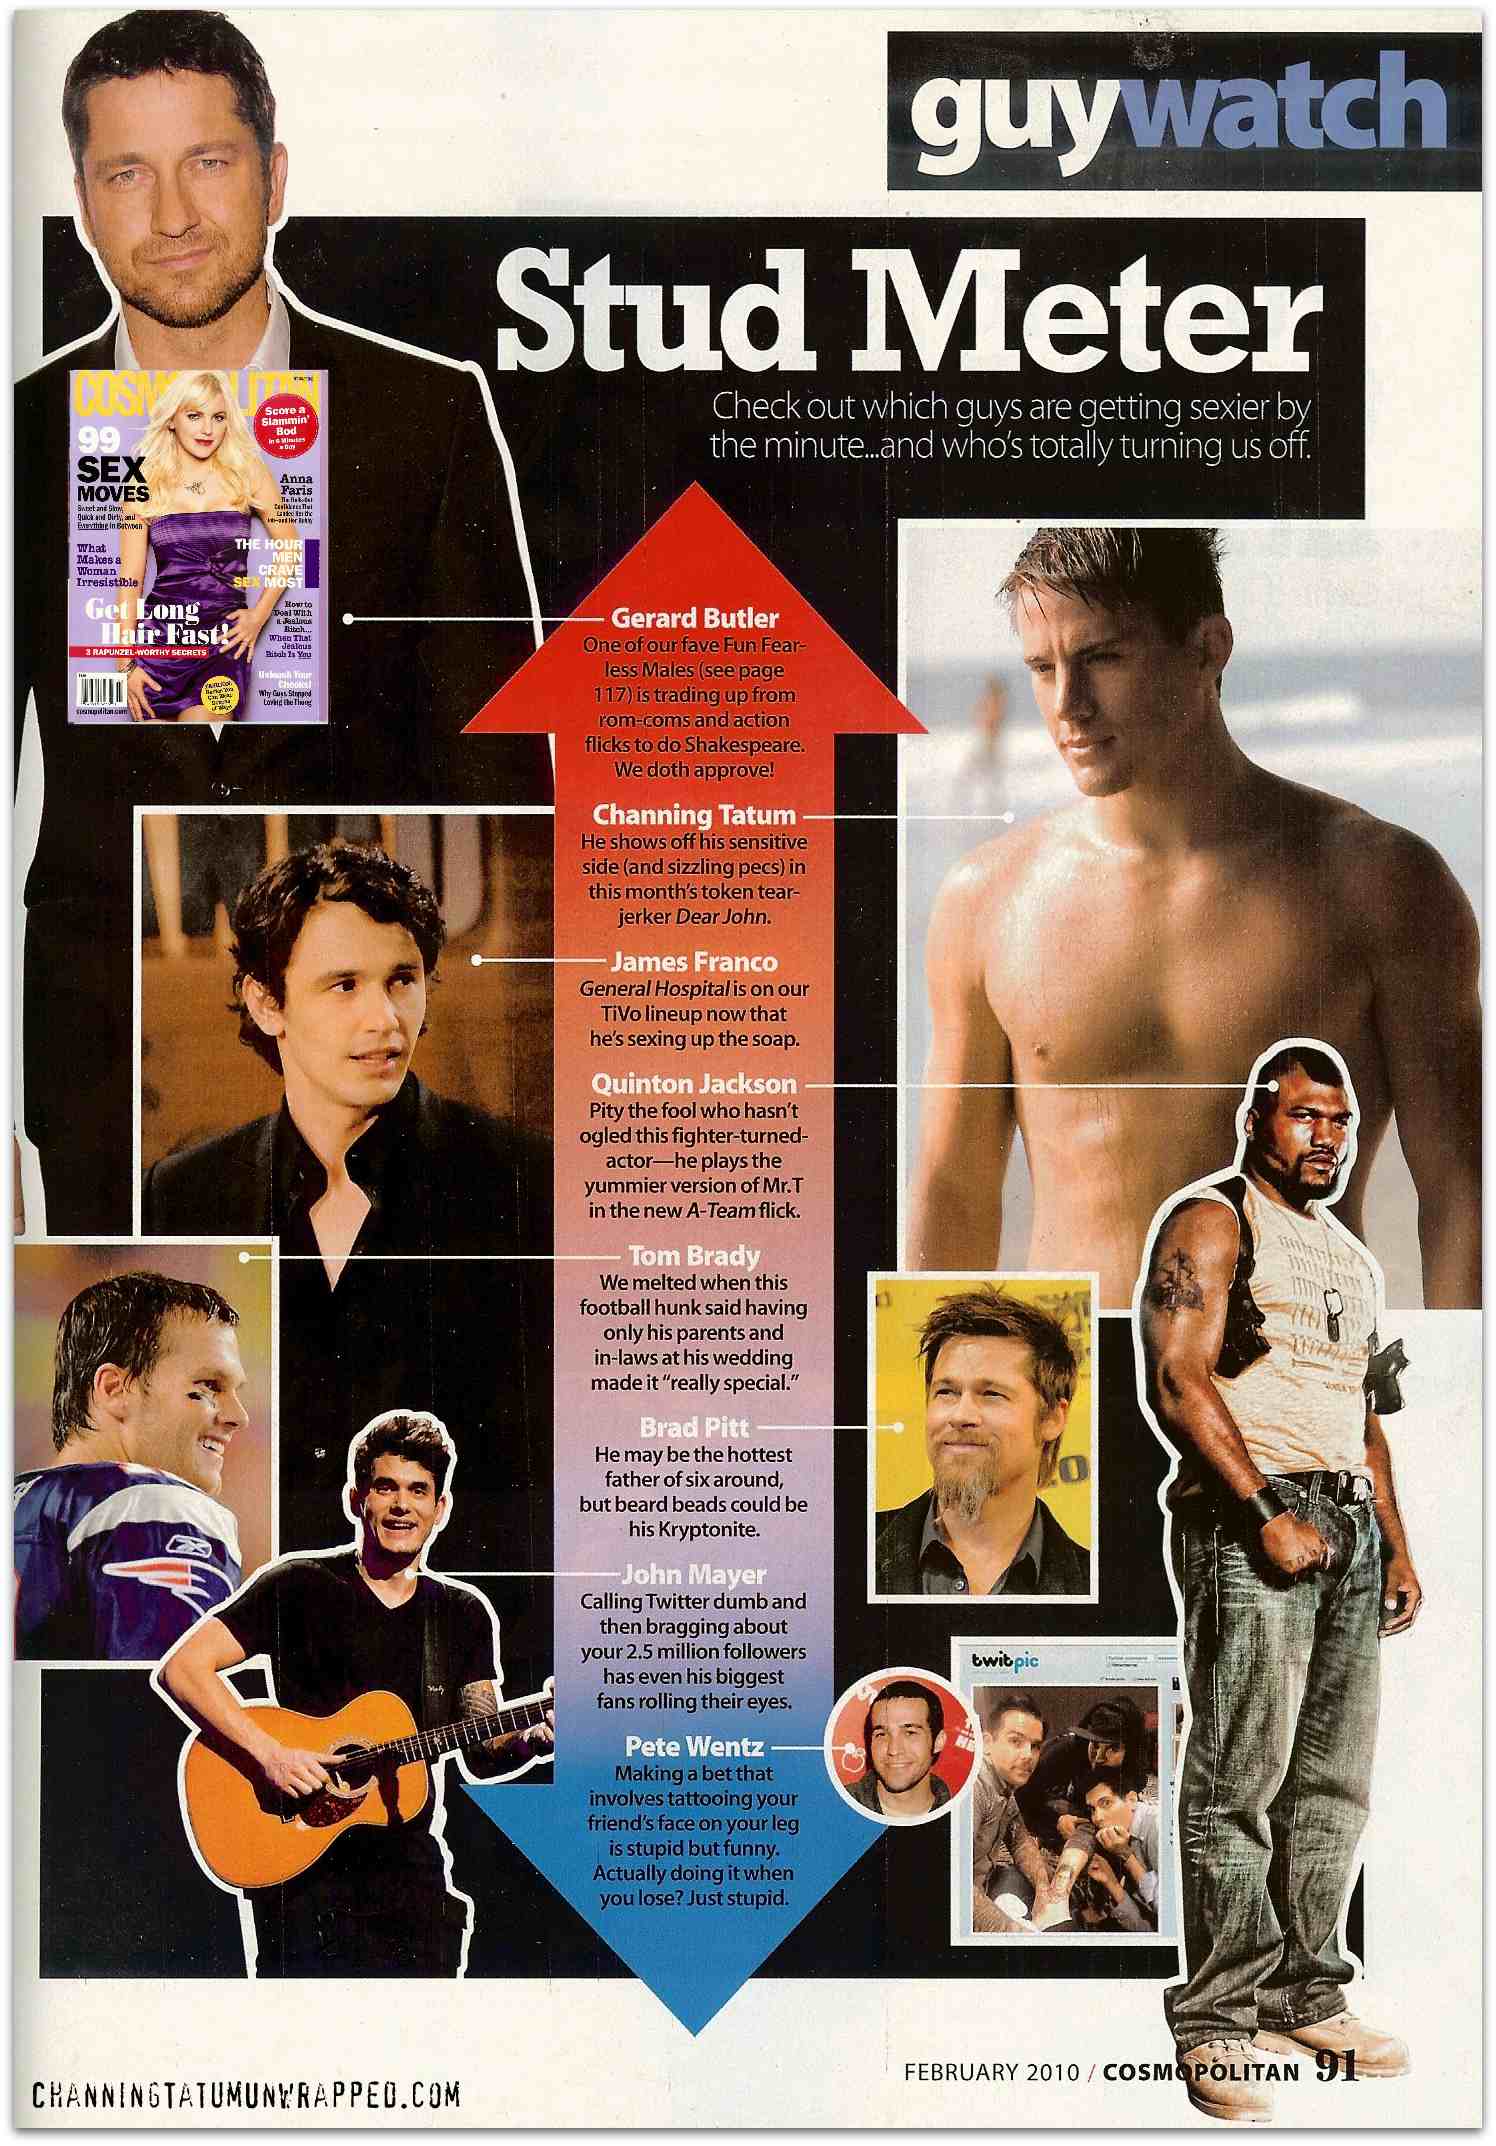 http://unwrappedphotos.com/wp-content/gallery/in-the-press/channing-tatum-cosmopolitan-february-2010.jpg